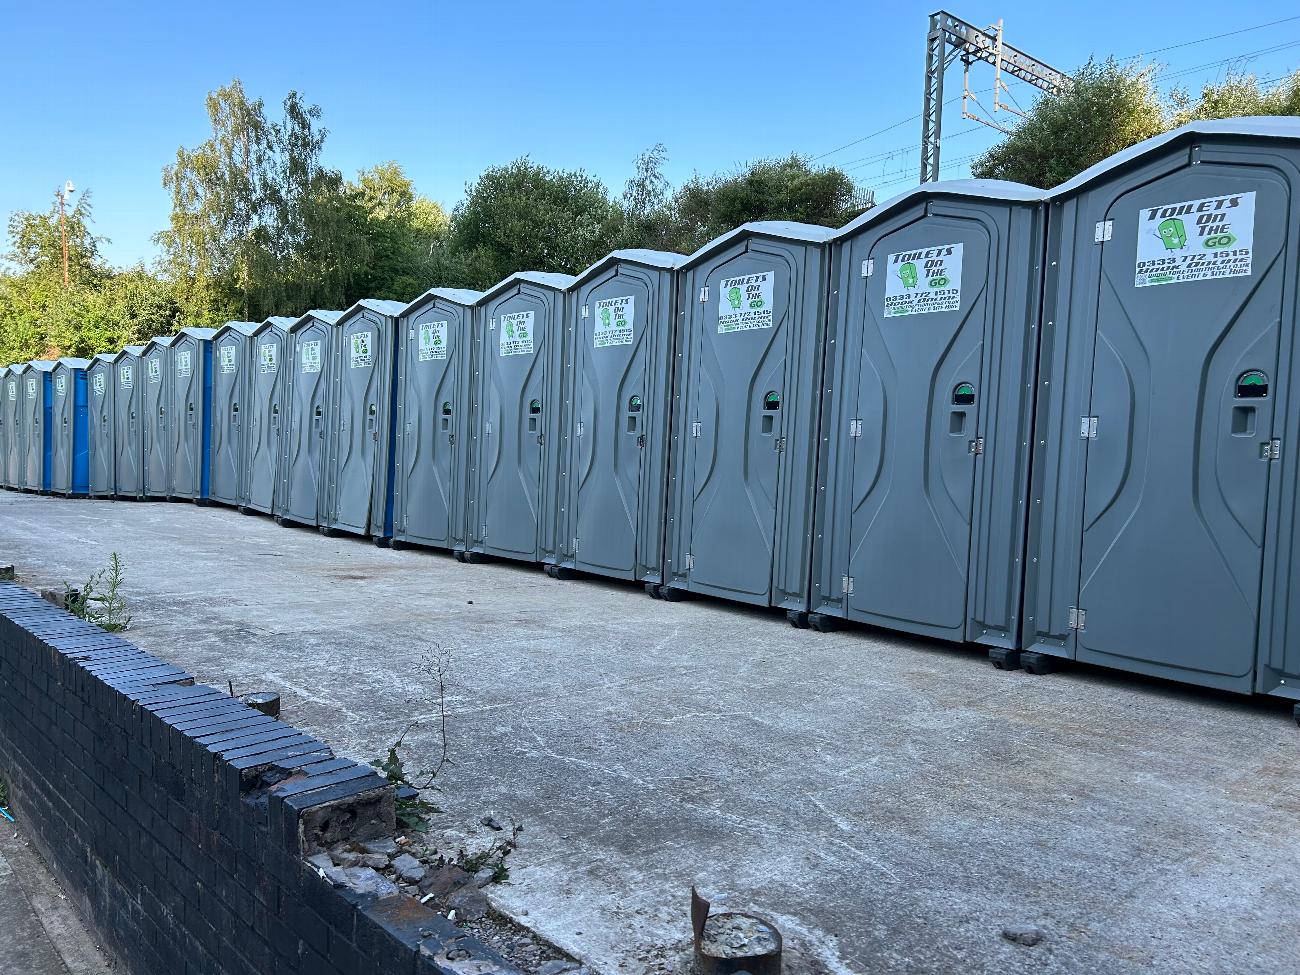 Gallery | Portable Toilet Loo Hire Rental Company in North West uk and Manchester gallery image 3